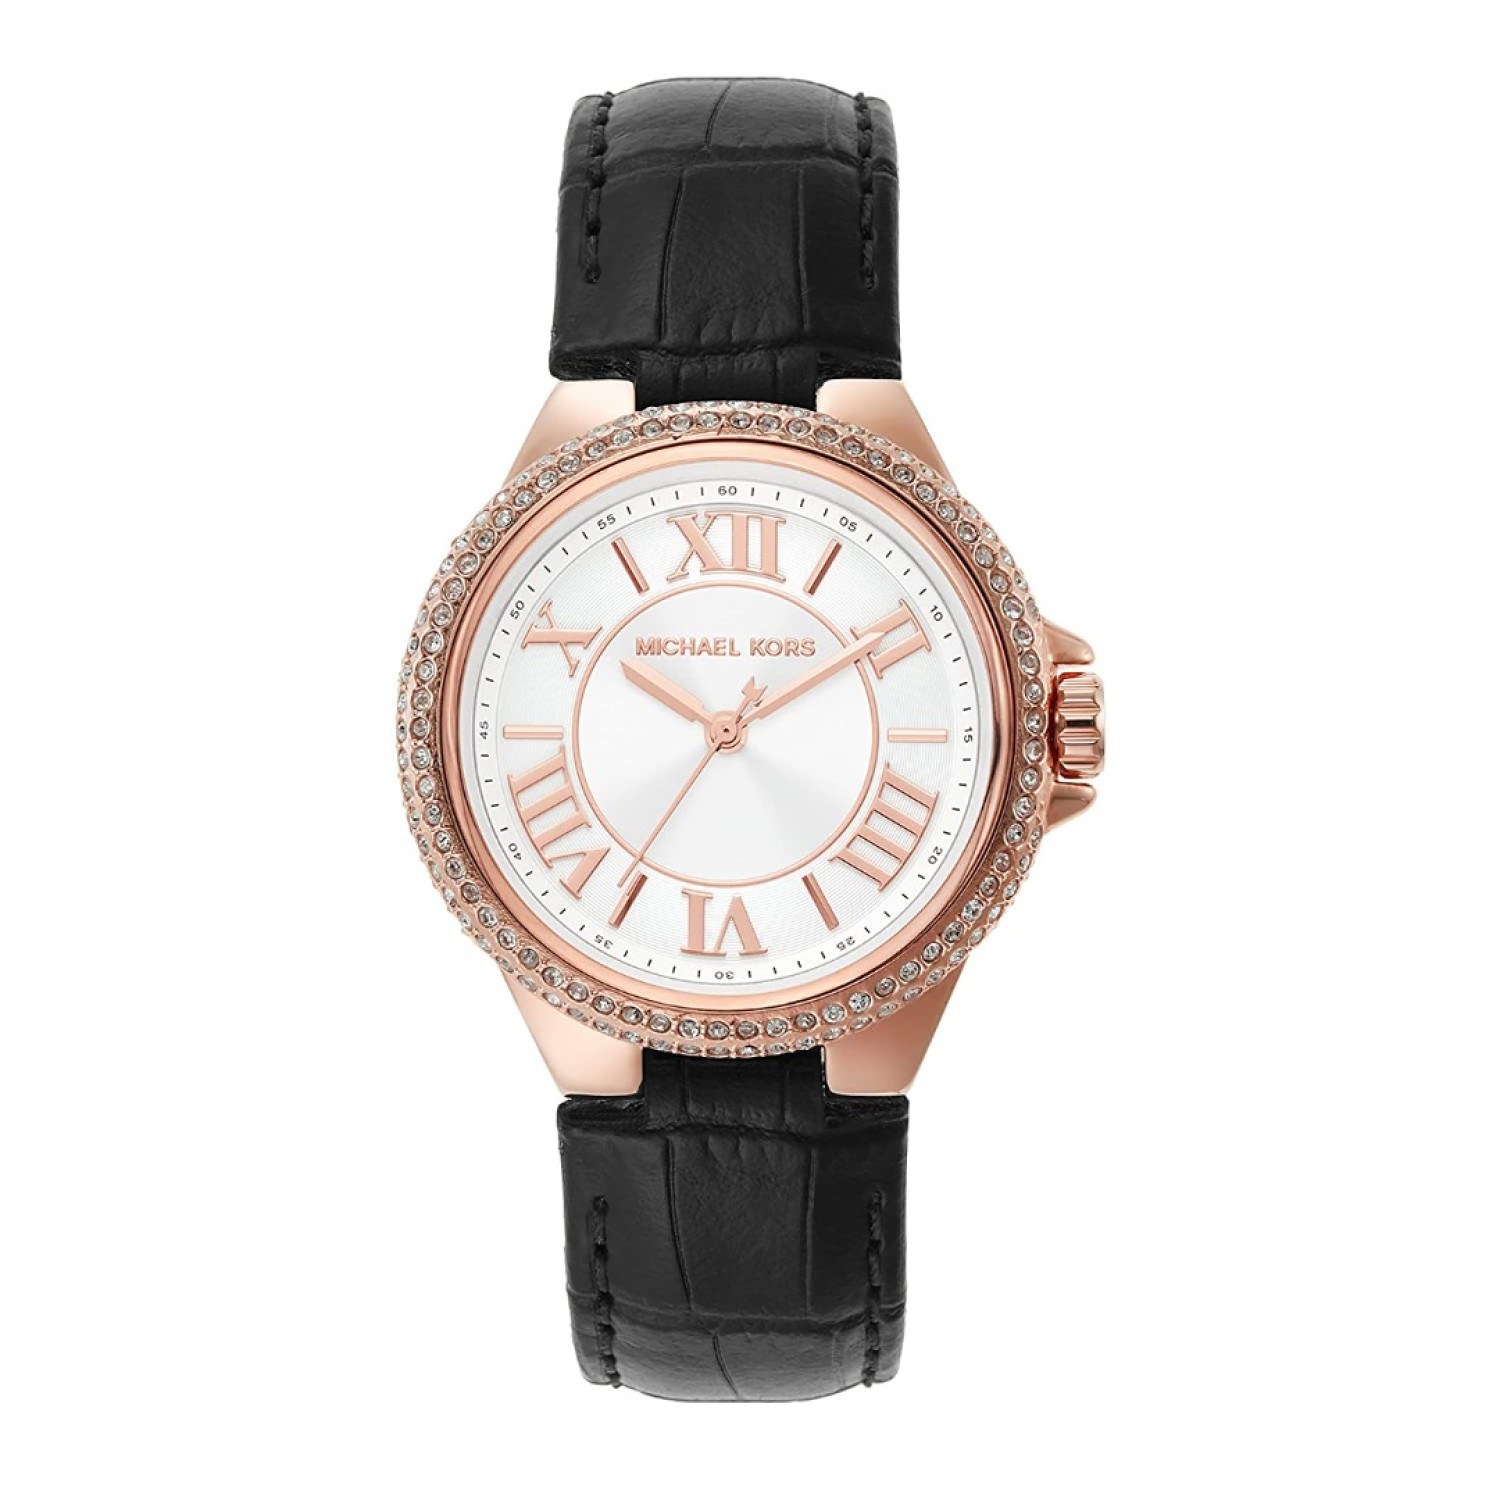 MK2962MICHAEL KORS WATCH CAMILLE CRYSTAL SET BLACK LEATHER WATCH is a stunning timepiece that combines classic elegance with modern sophistication.